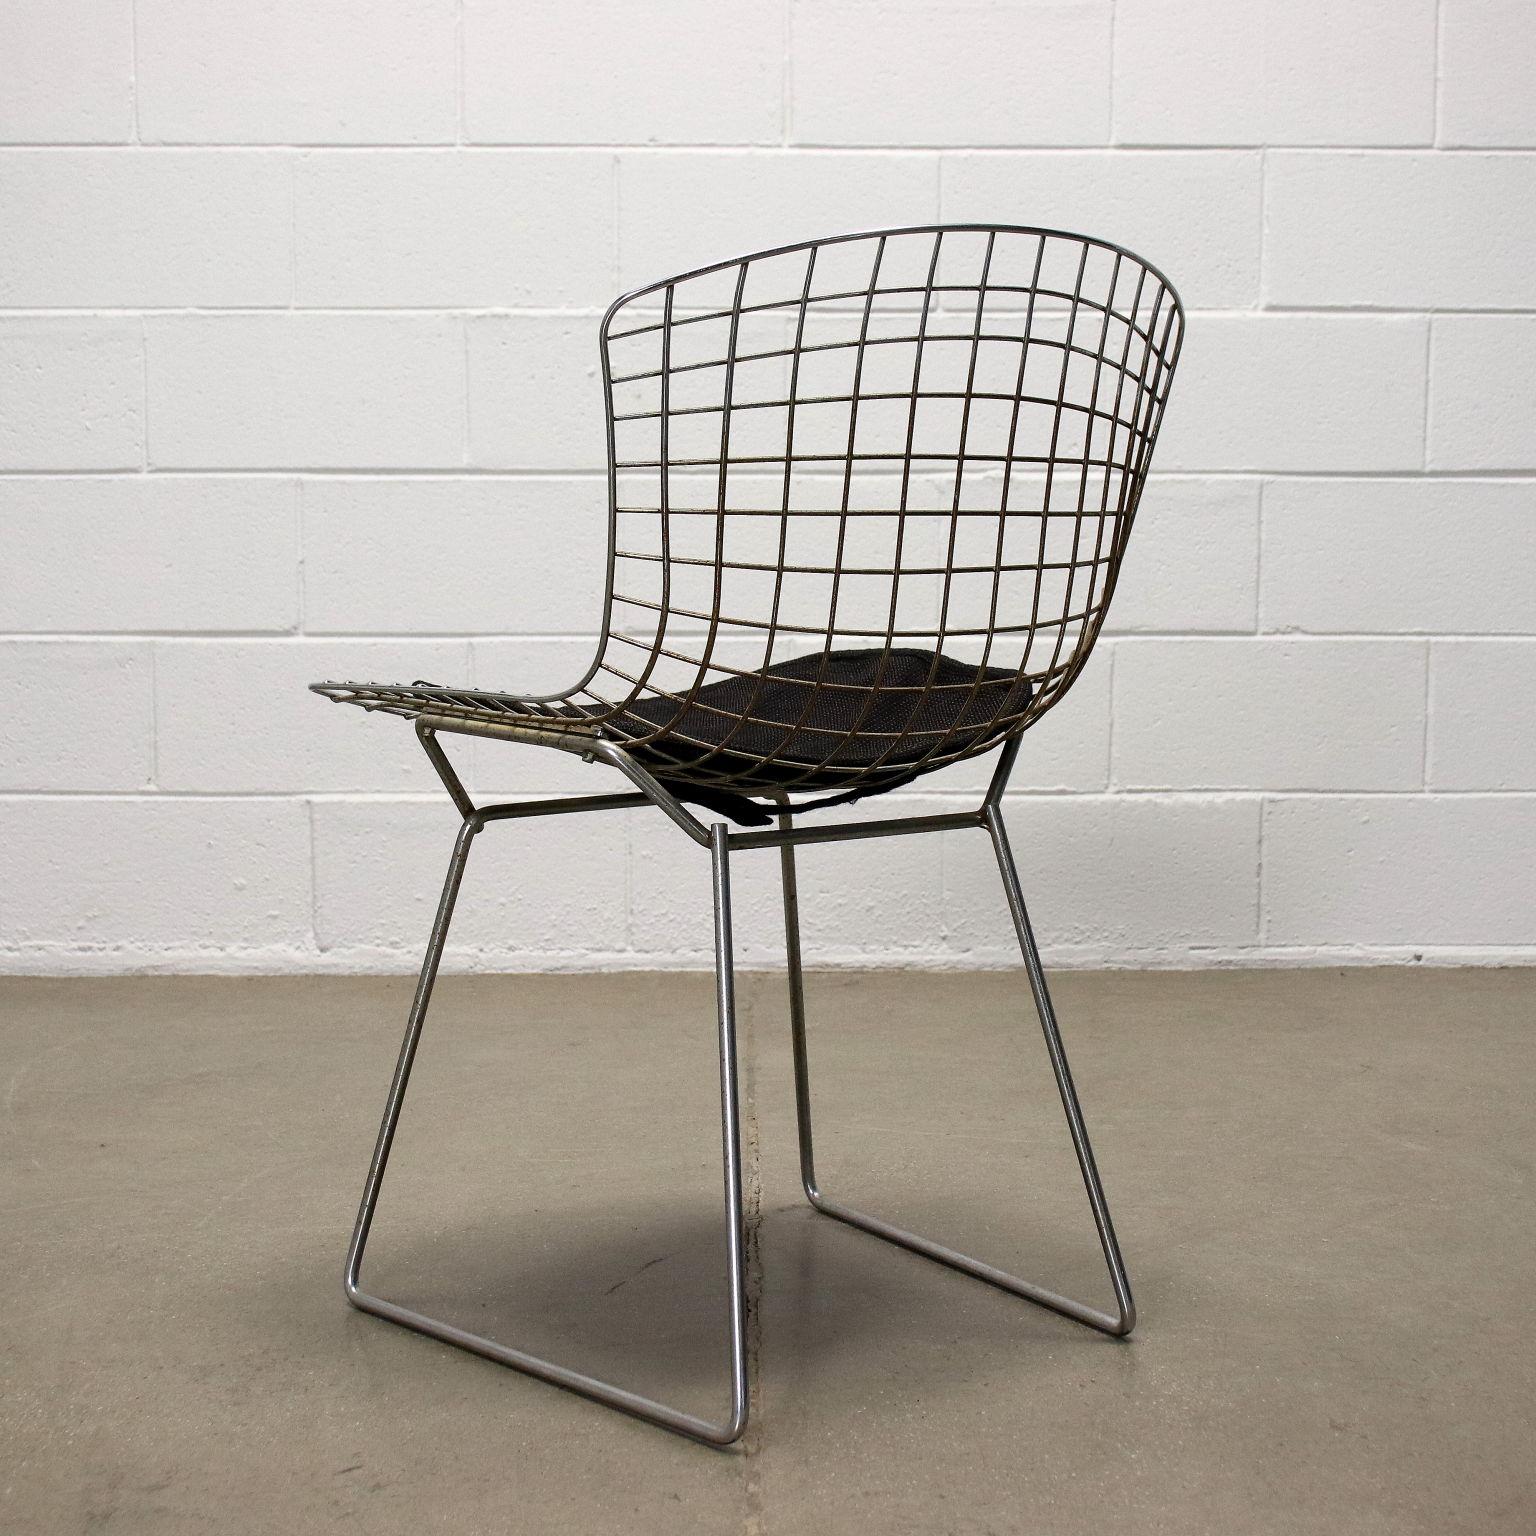 Group of 4 Chairs by Knoll Chromed Metal Fabric USA, 1960s-1970s 1